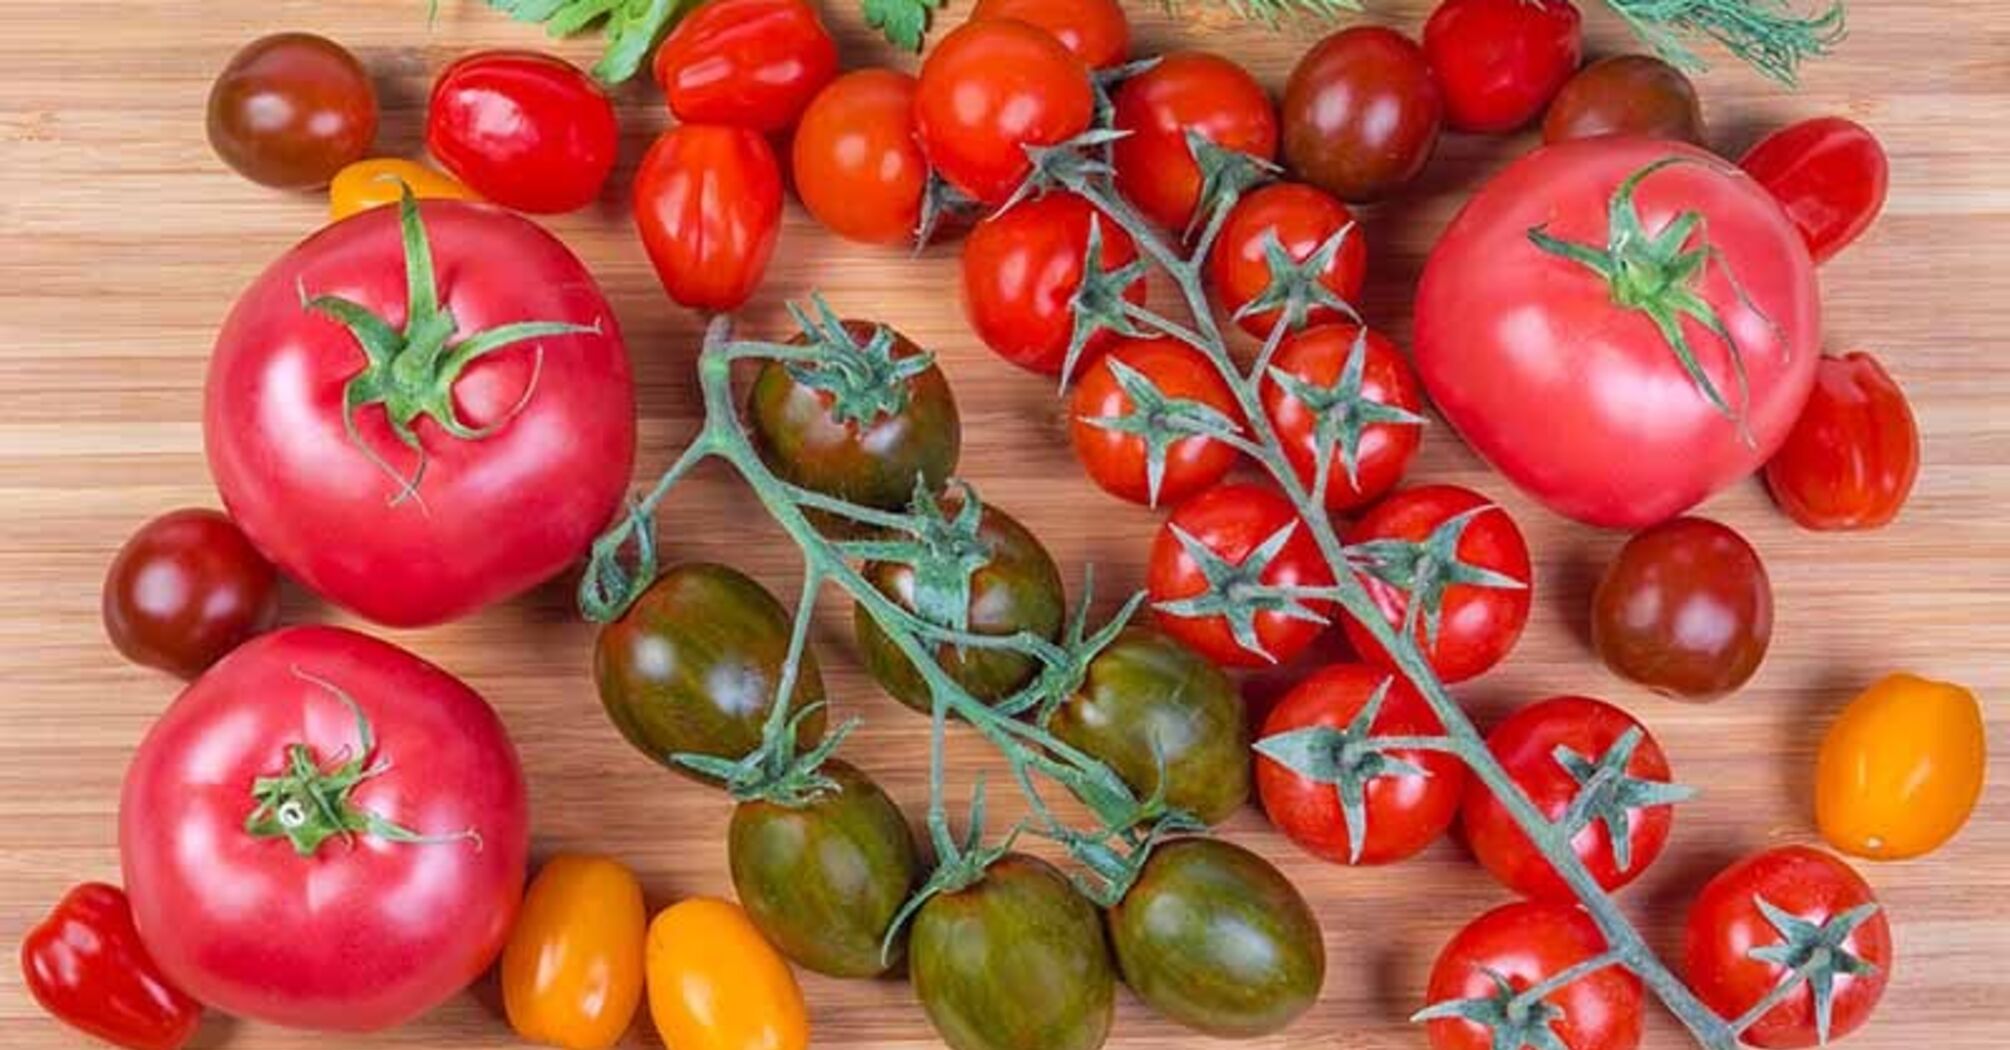 Experts name sweet and resistant tomato varieties